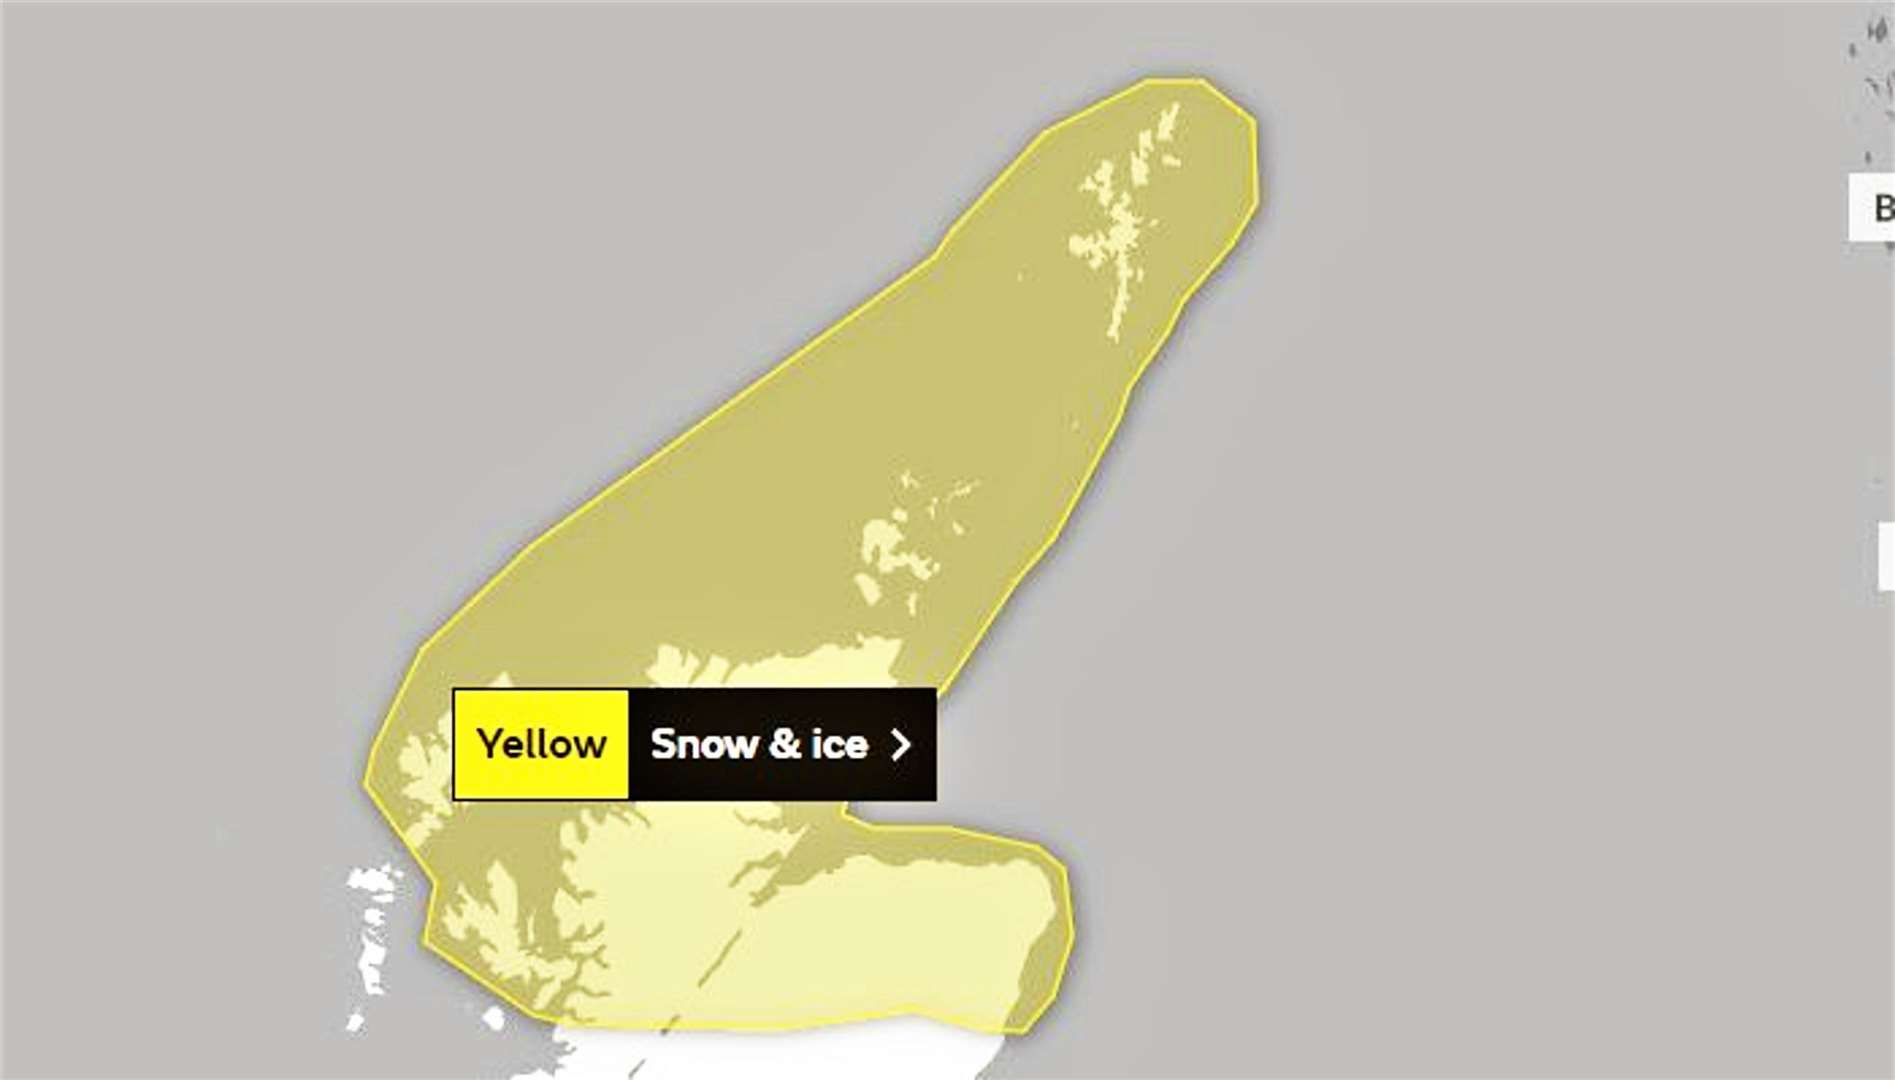 Met Office weather warning for tonight and tomorrow.